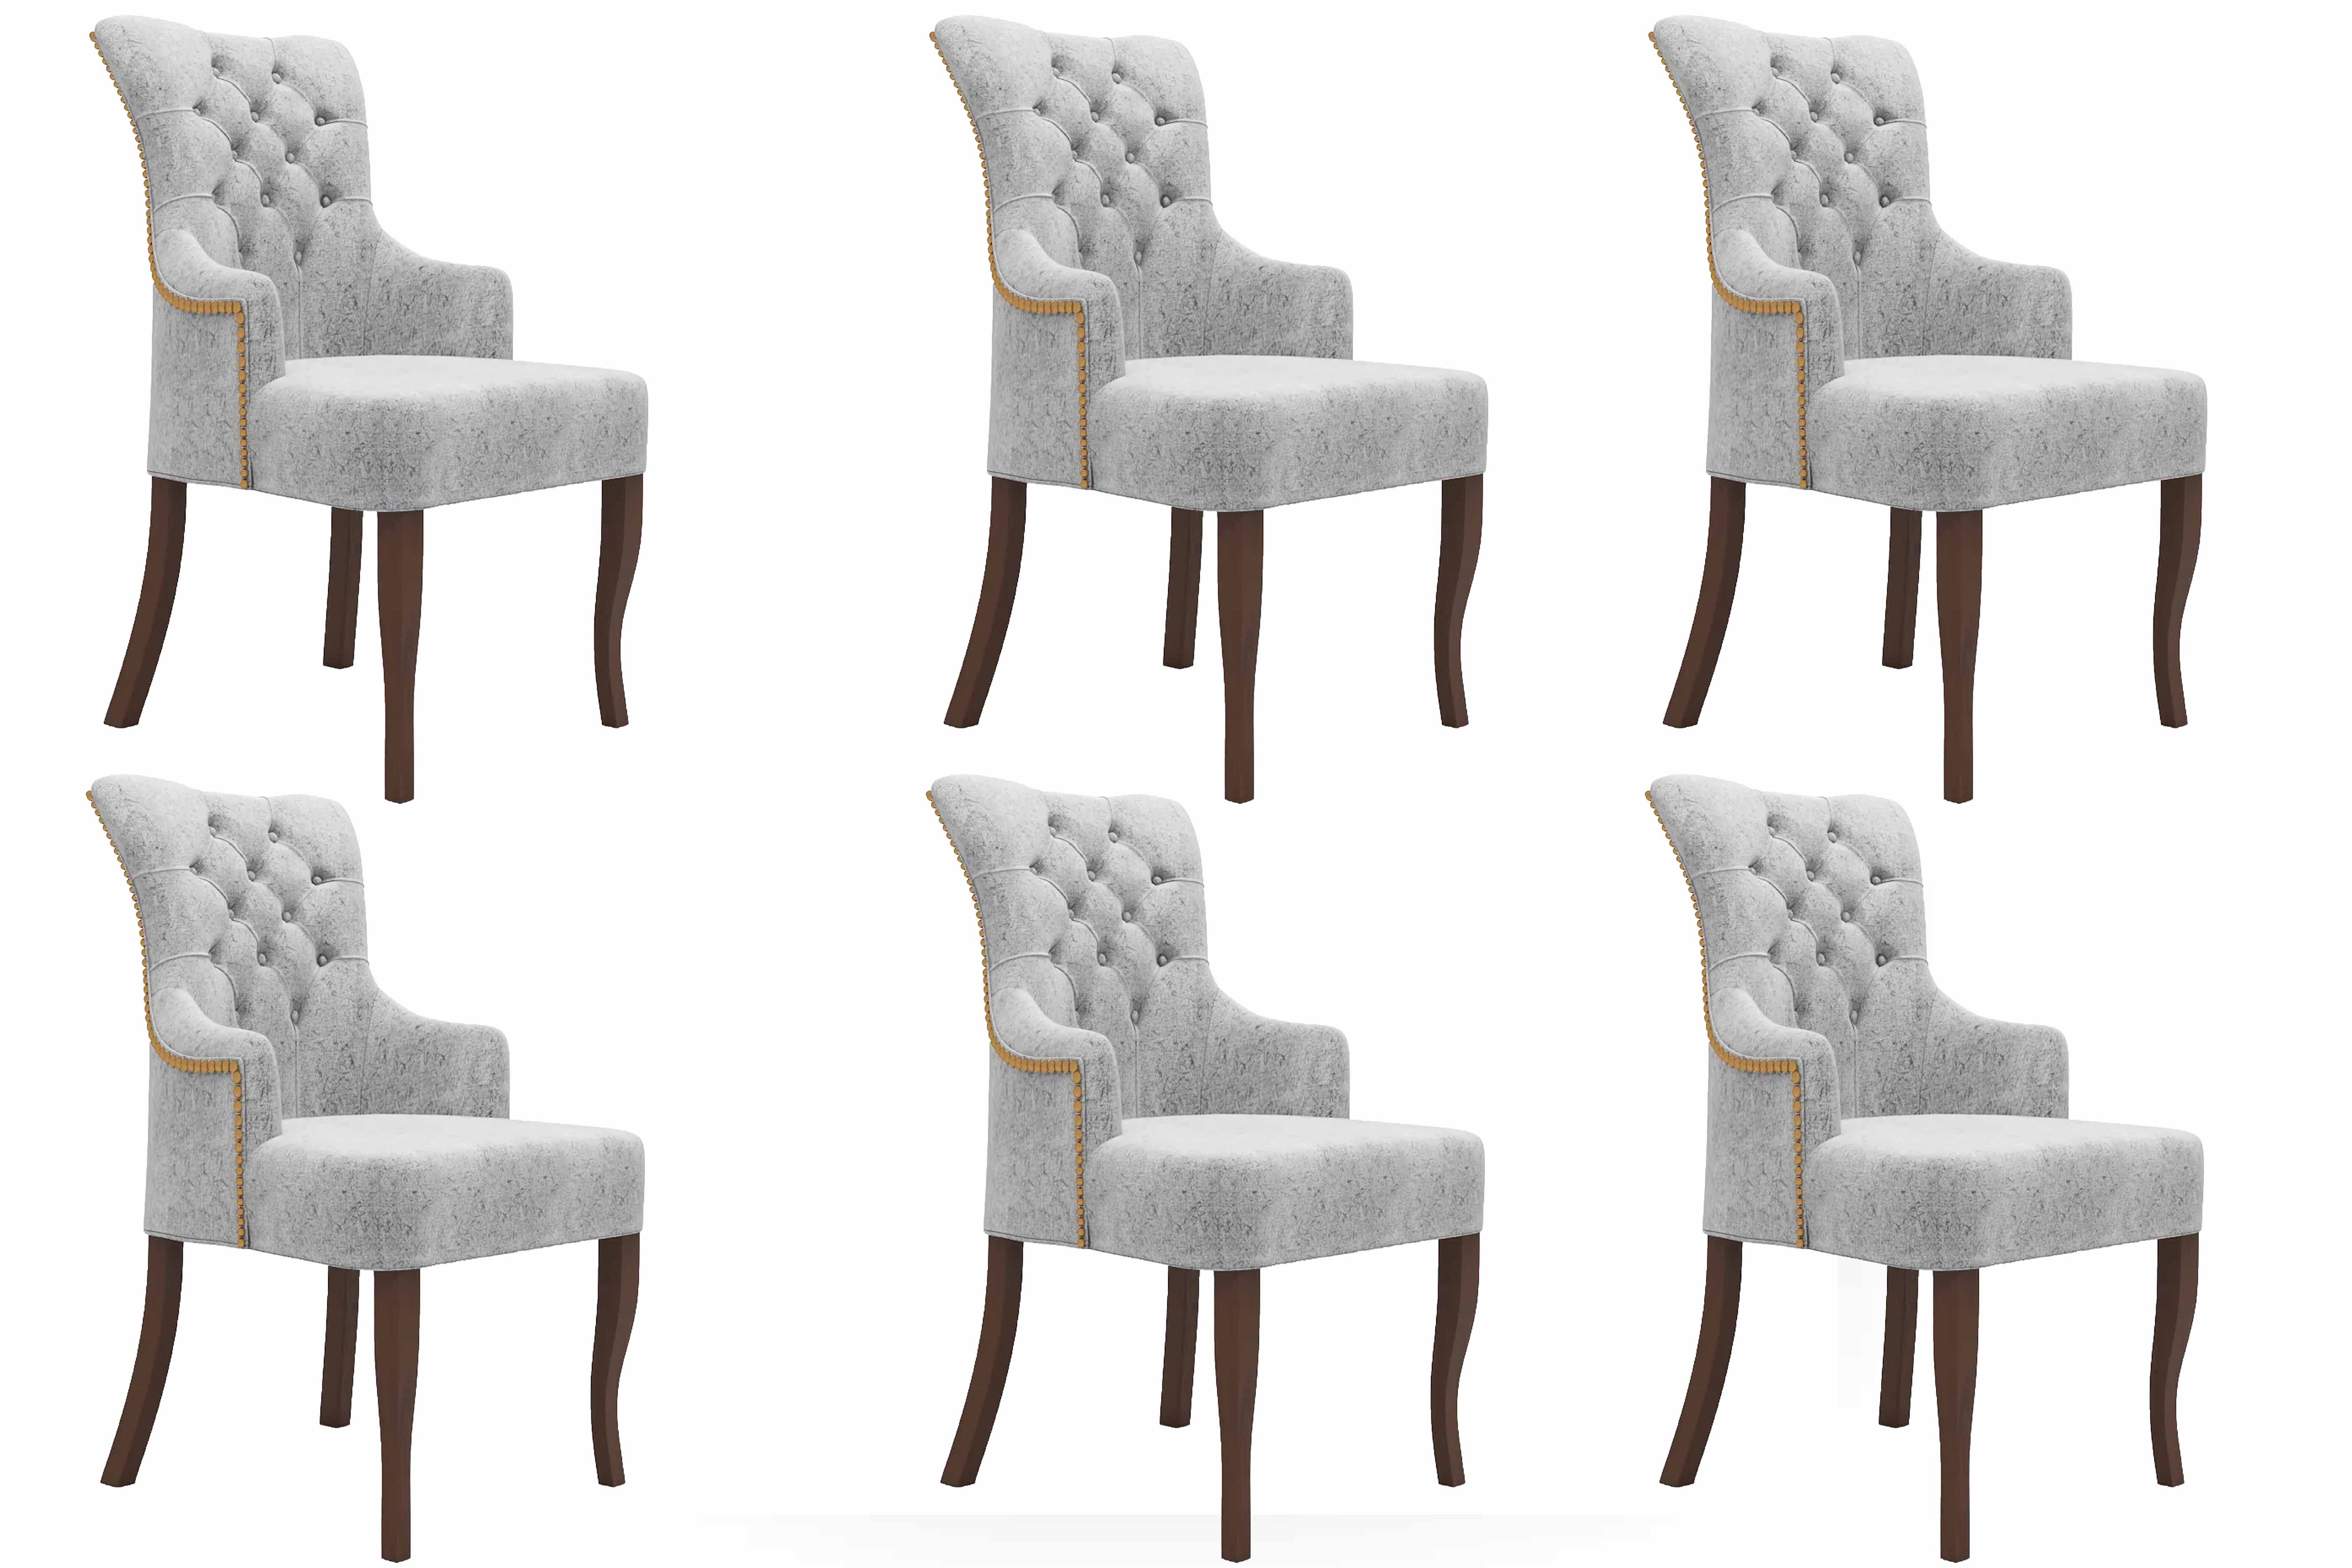 Dynamo gray dining chair (set of 6)